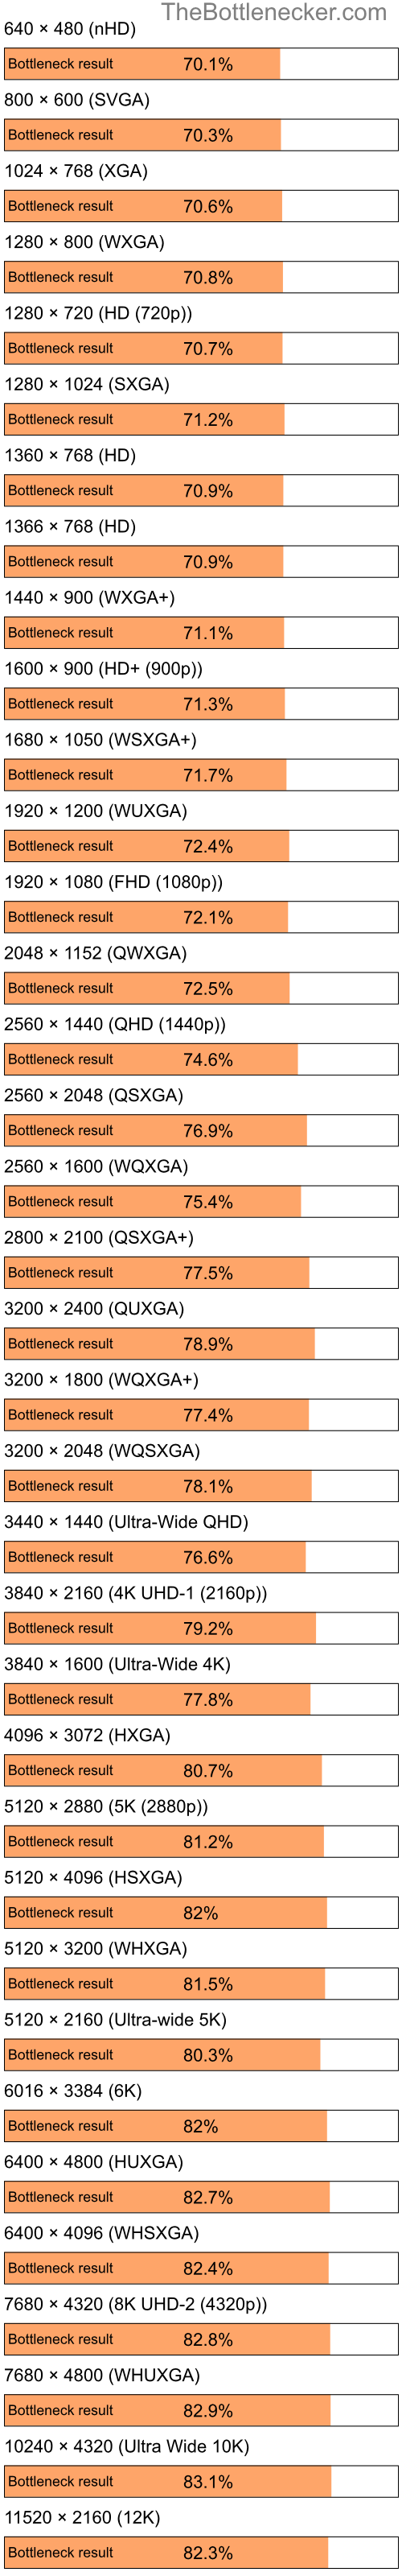 Bottleneck results by resolution for Intel Celeron M 420 and AMD Mobility Radeon 9600 in Processor Intense Tasks